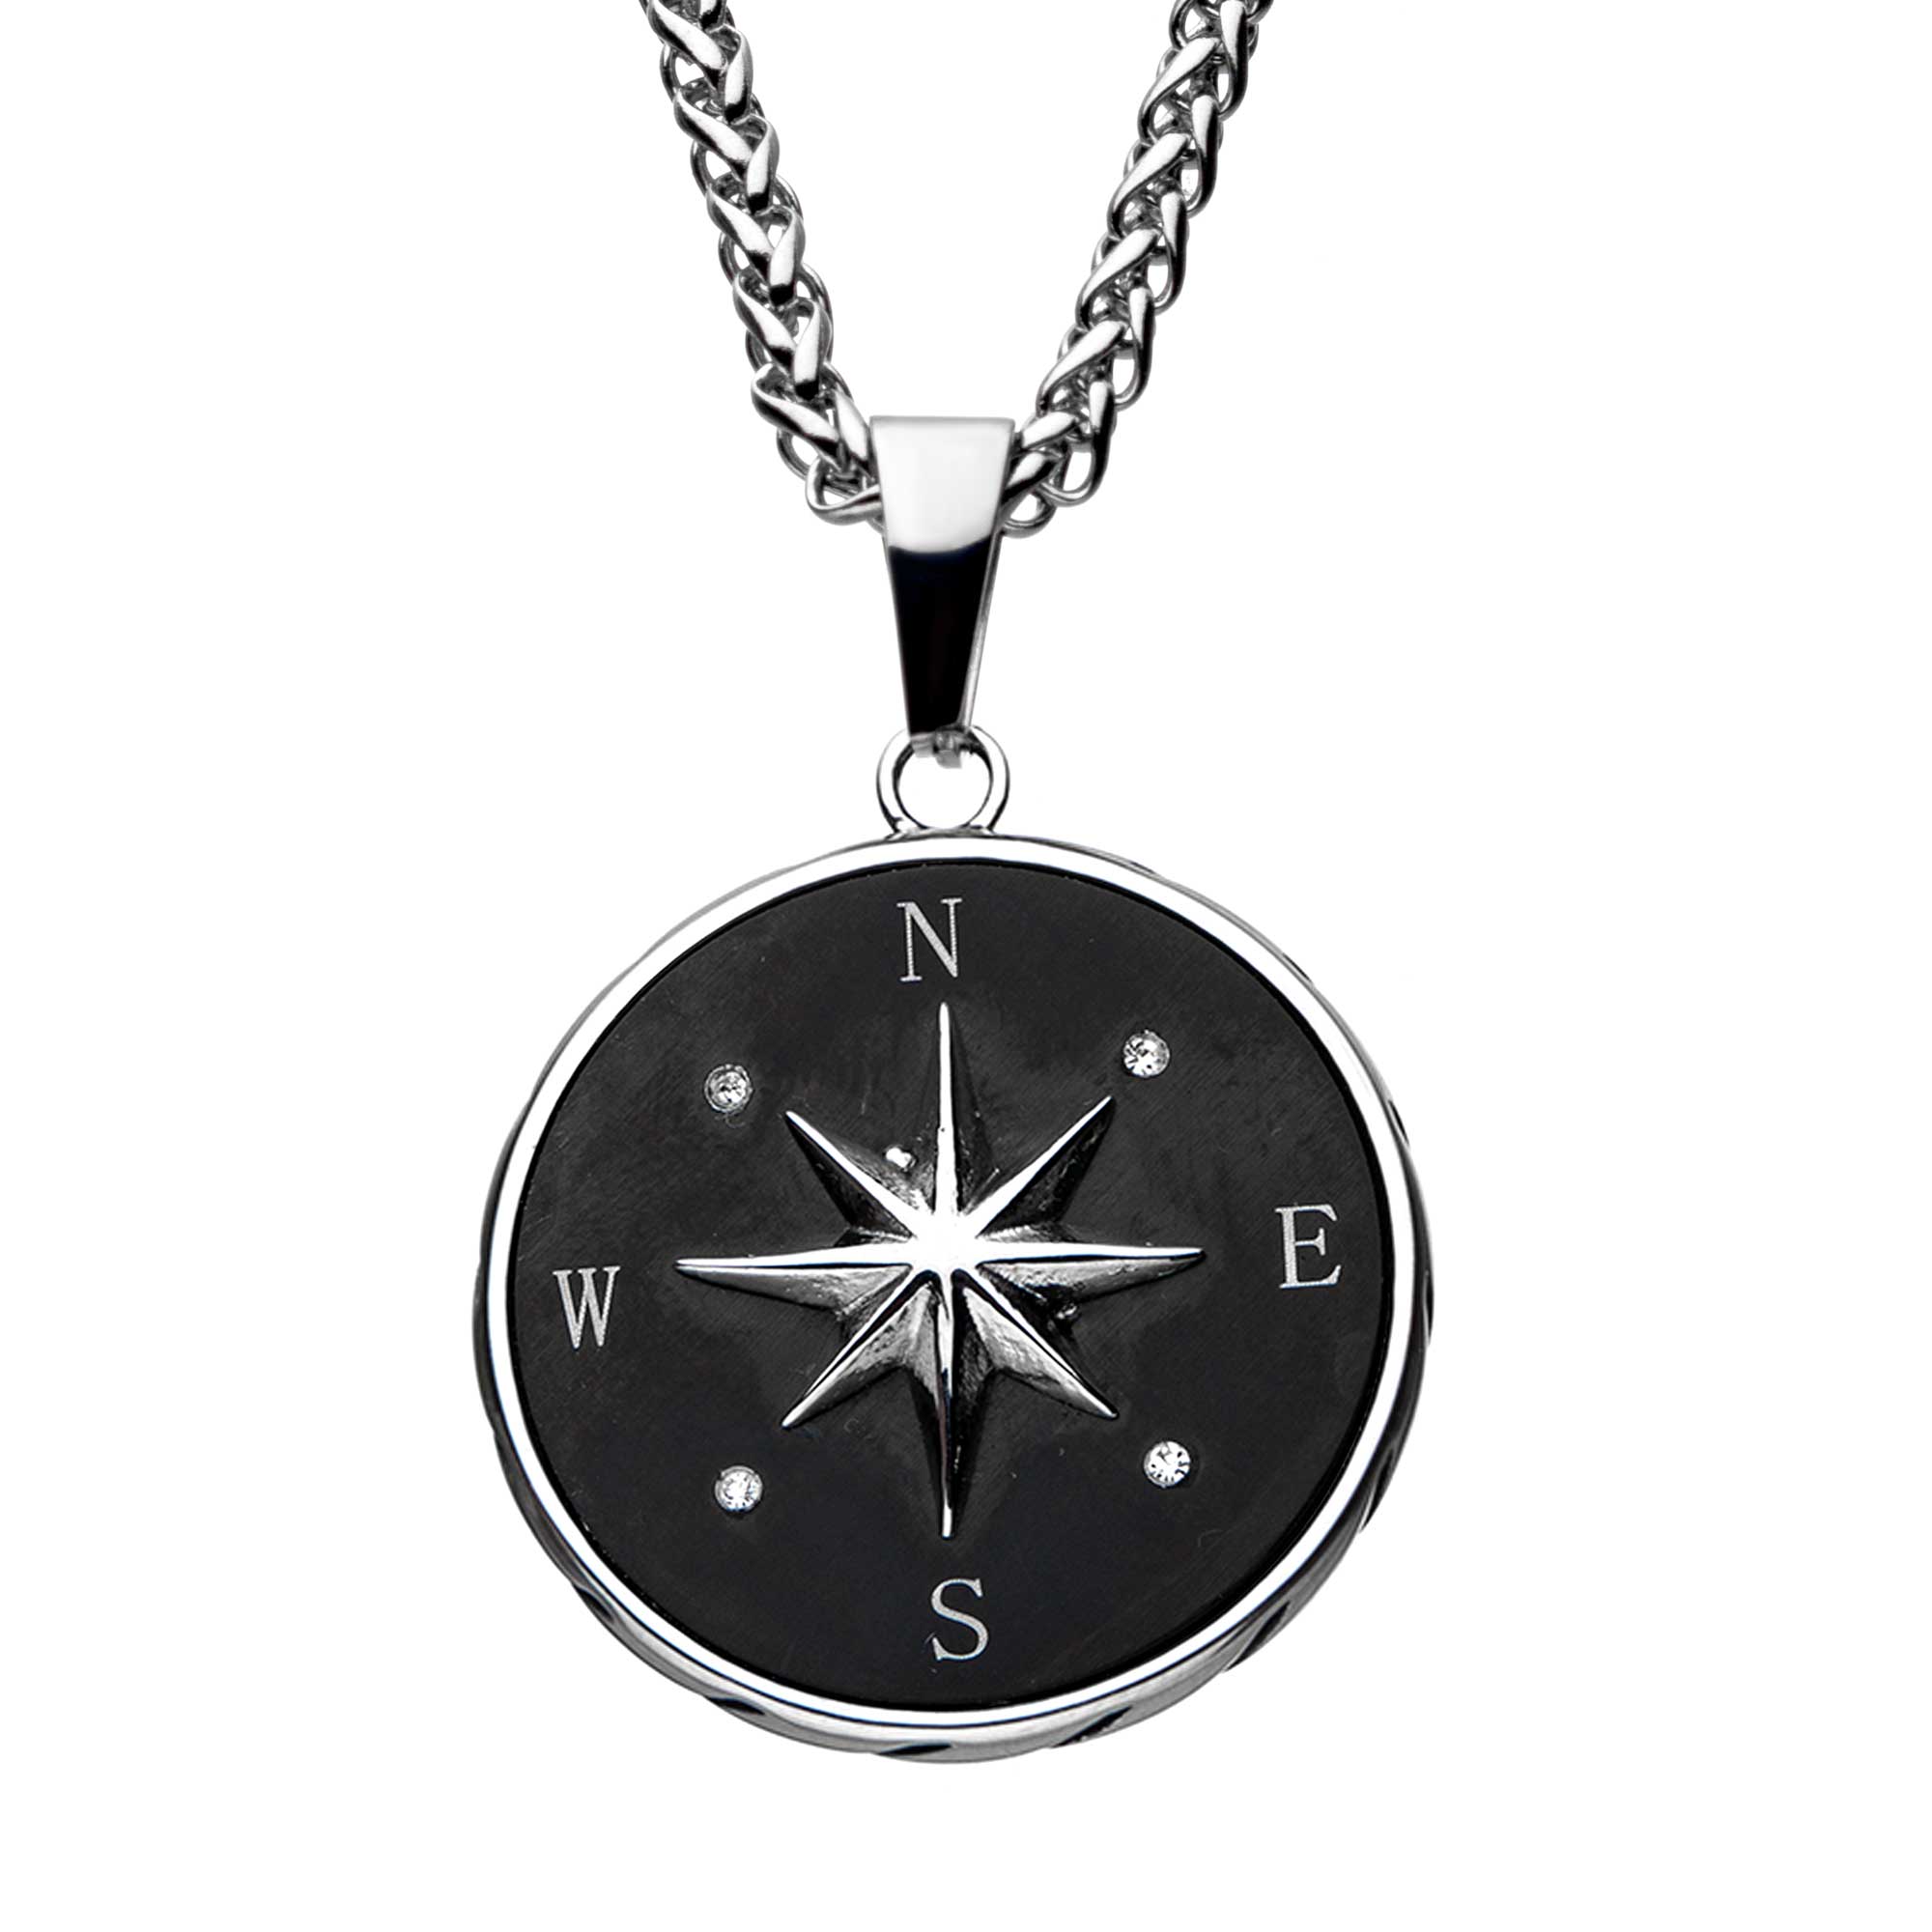 Stainless Steel and Black Plated Compass Pendant with Chain Spath Jewelers Bartow, FL